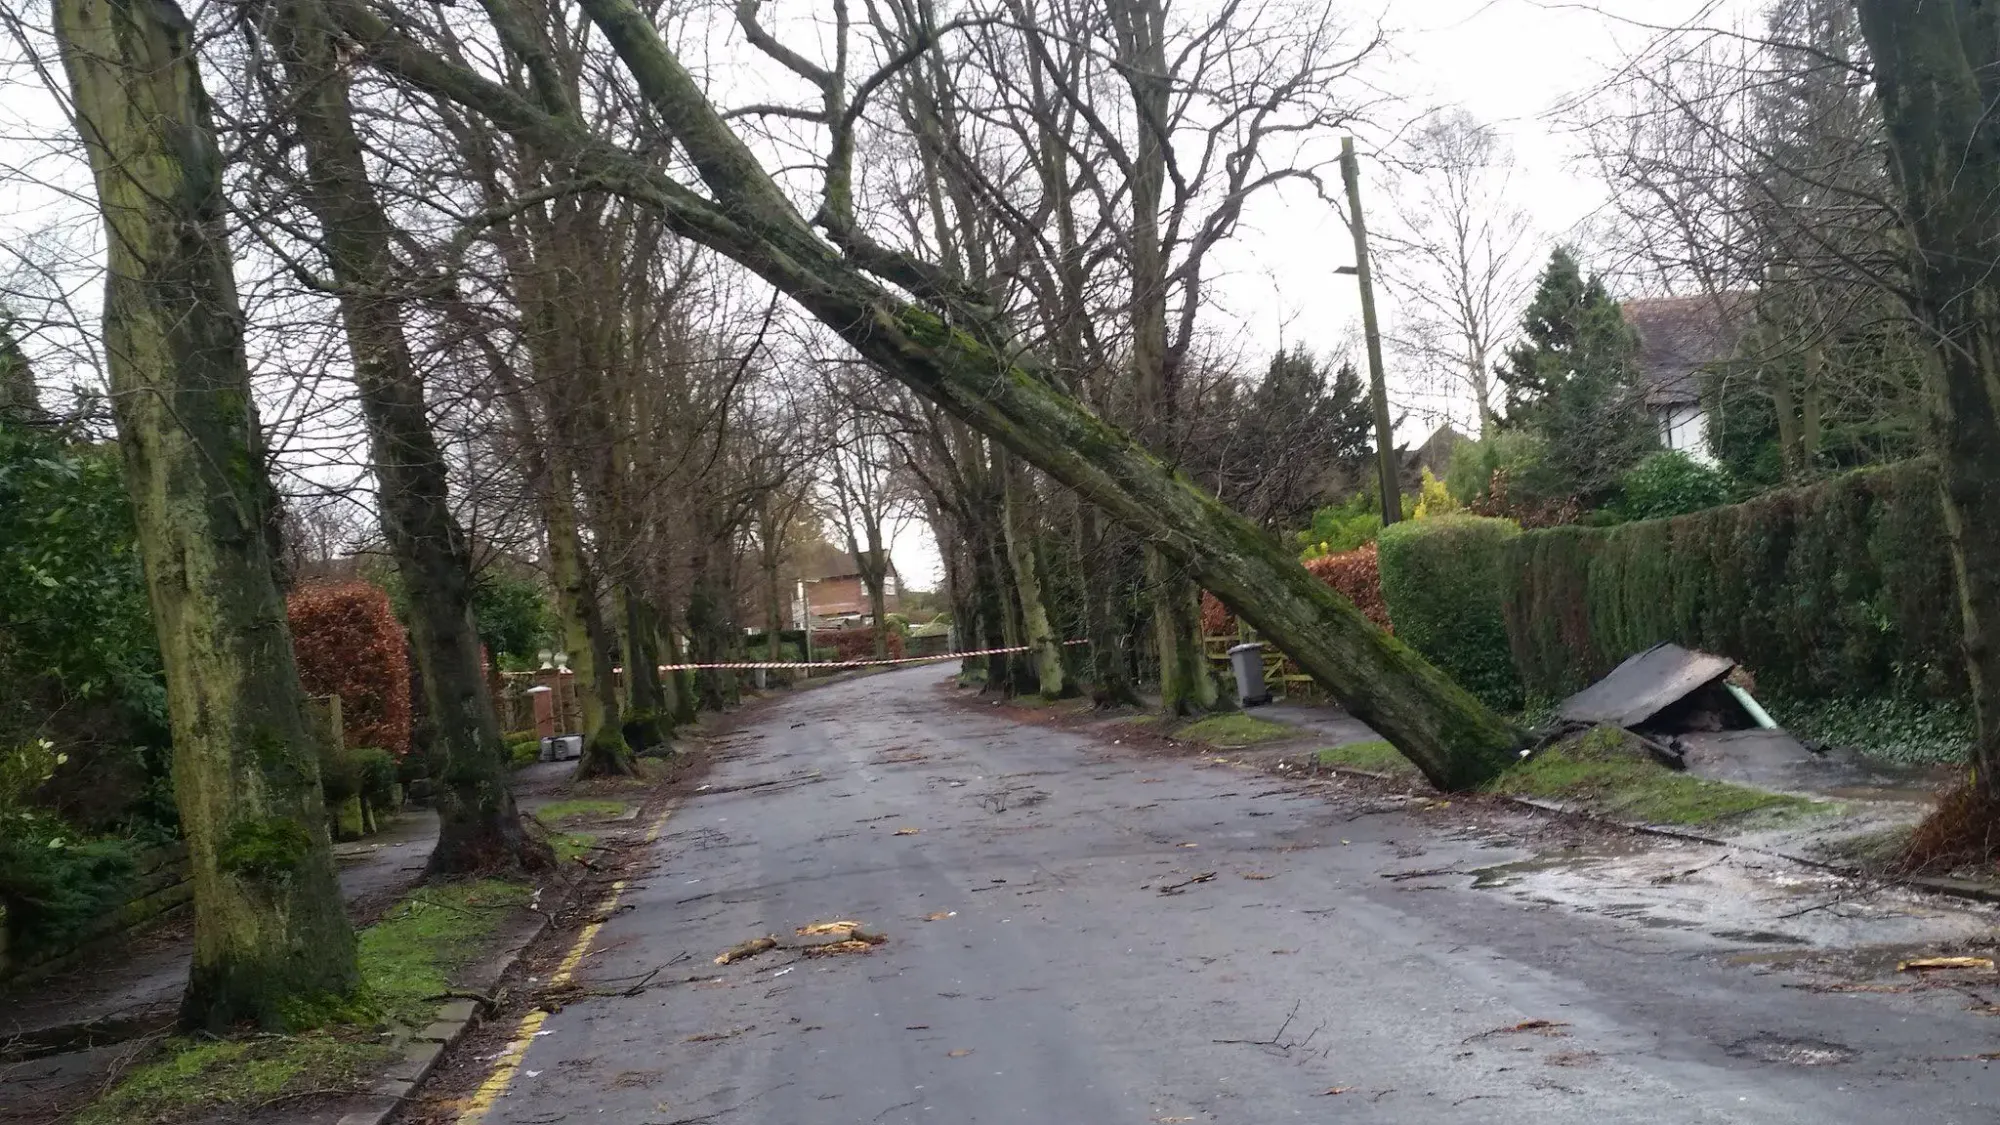 Mayfield Road in Timperley